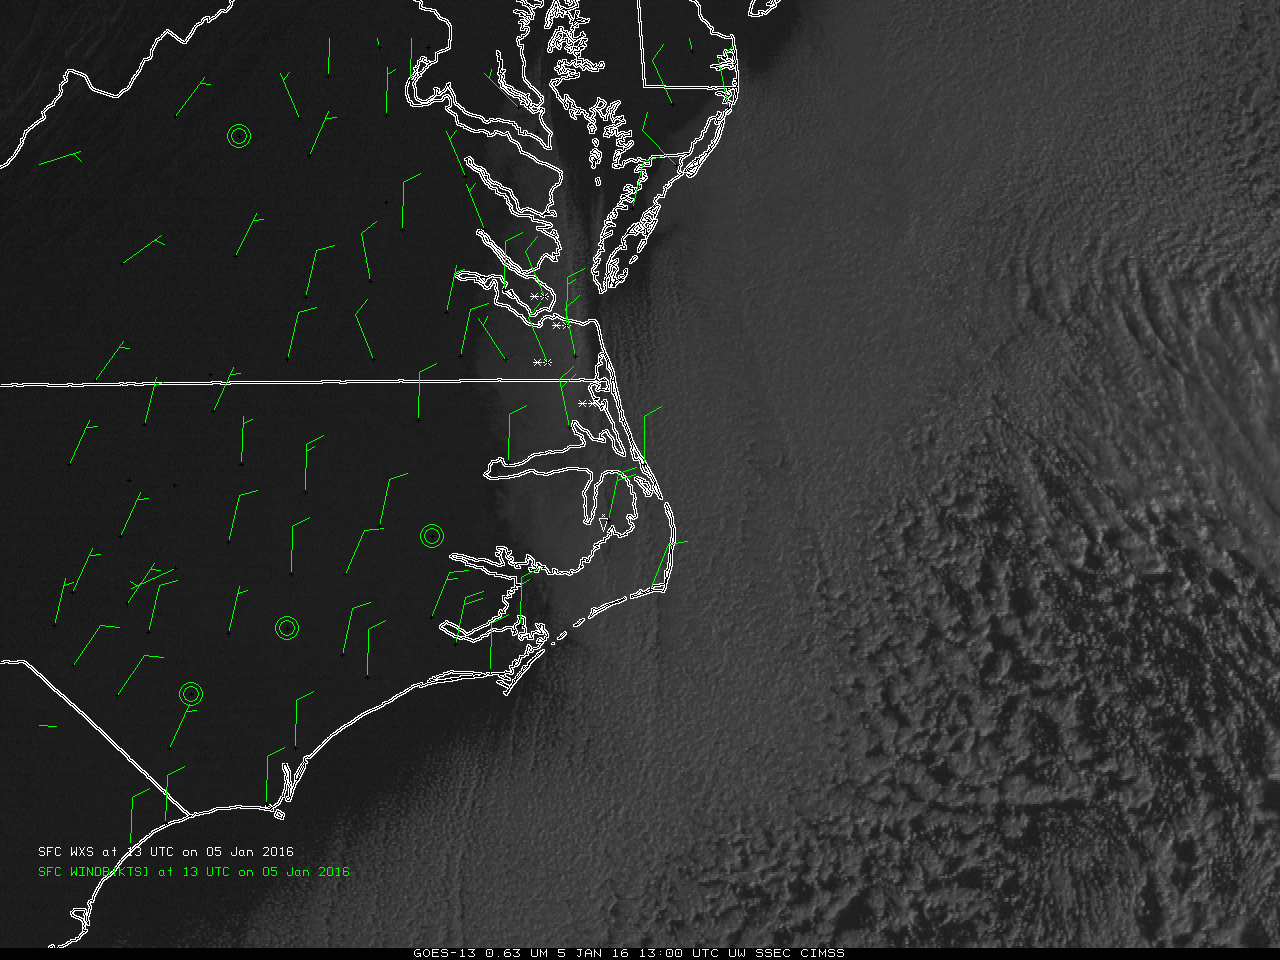 GOES-13 Visible (0.65 µm) Imagery, 1300 and 2045 UTC on 5 January 2015, with surface weather observations and wind barbs [click to enlarge]